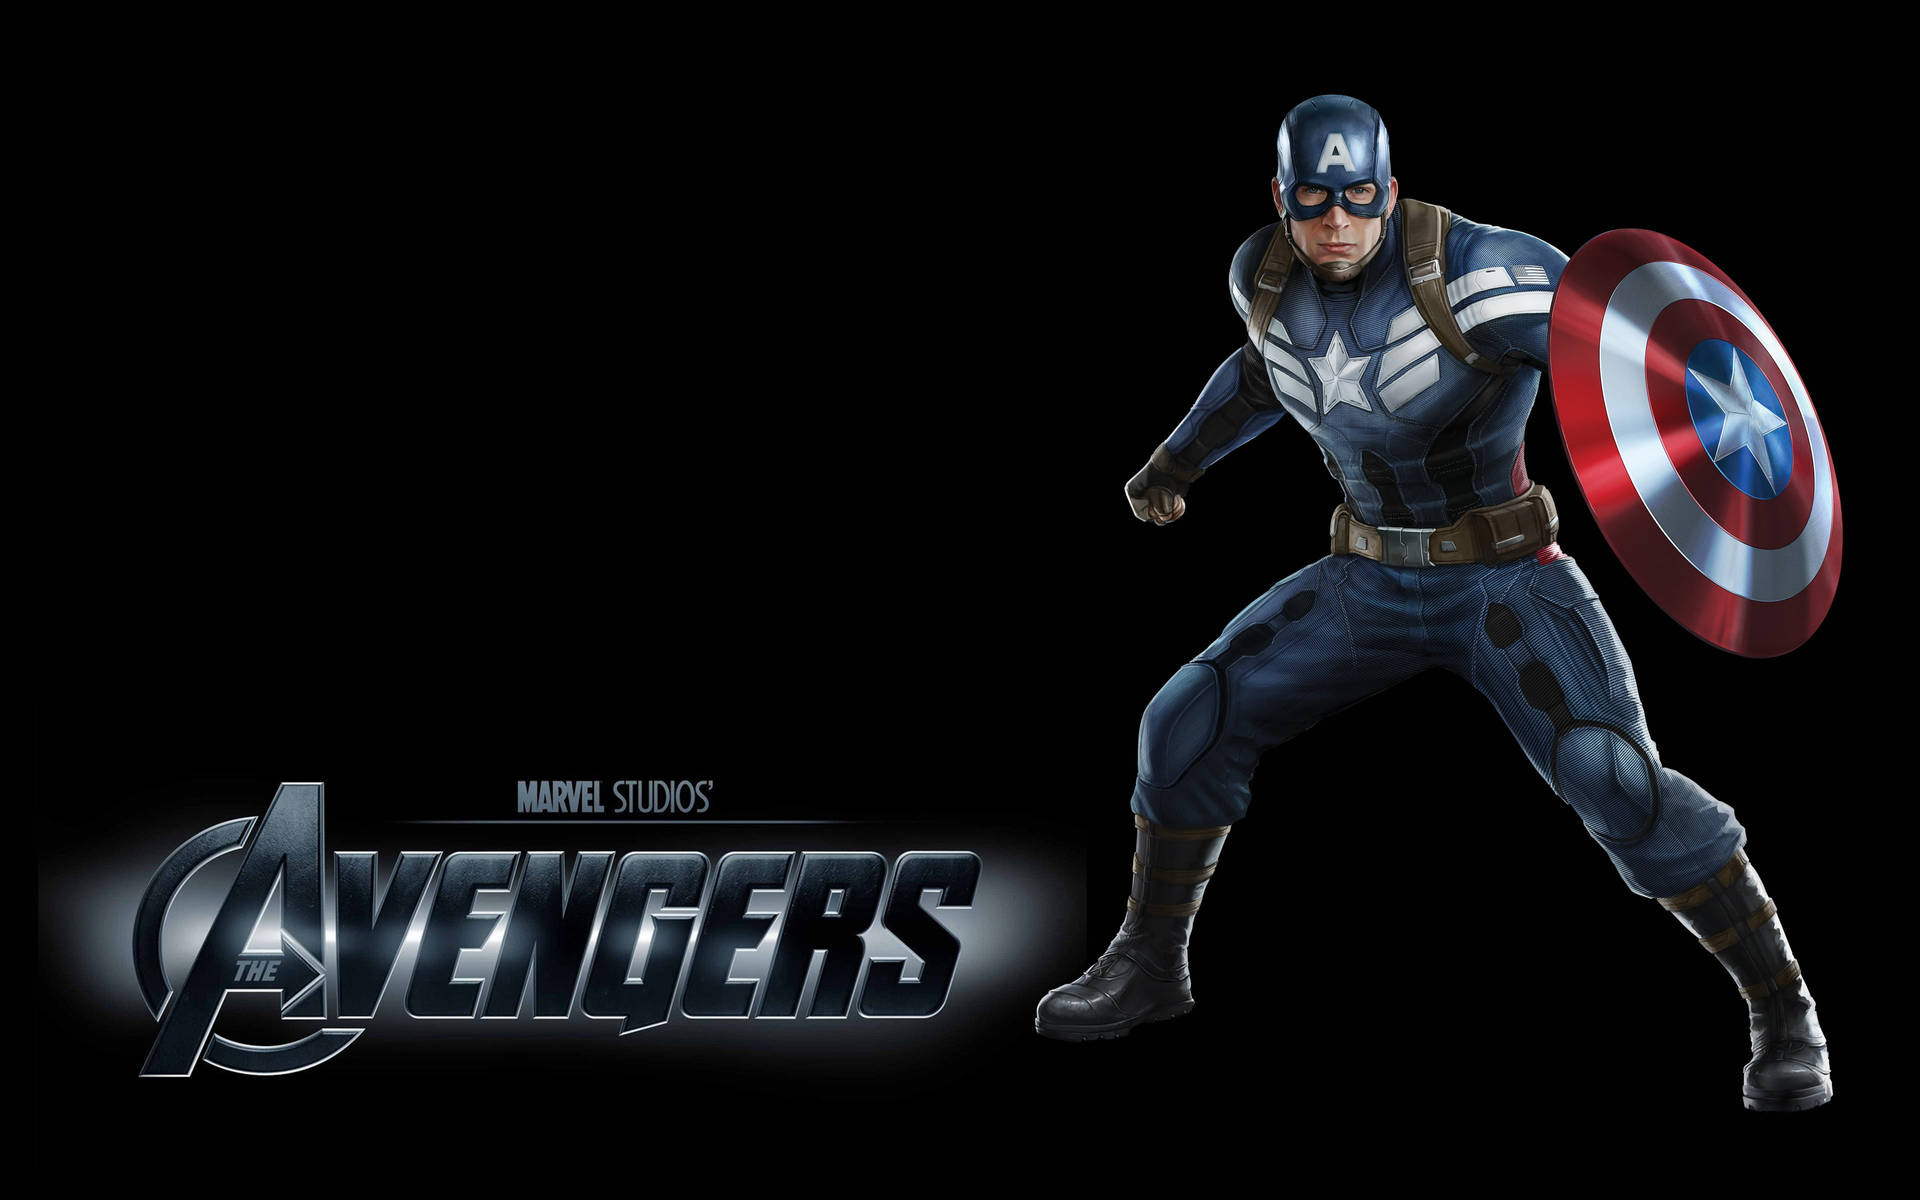 Standing tall against evil, Captain America defends justice Wallpaper